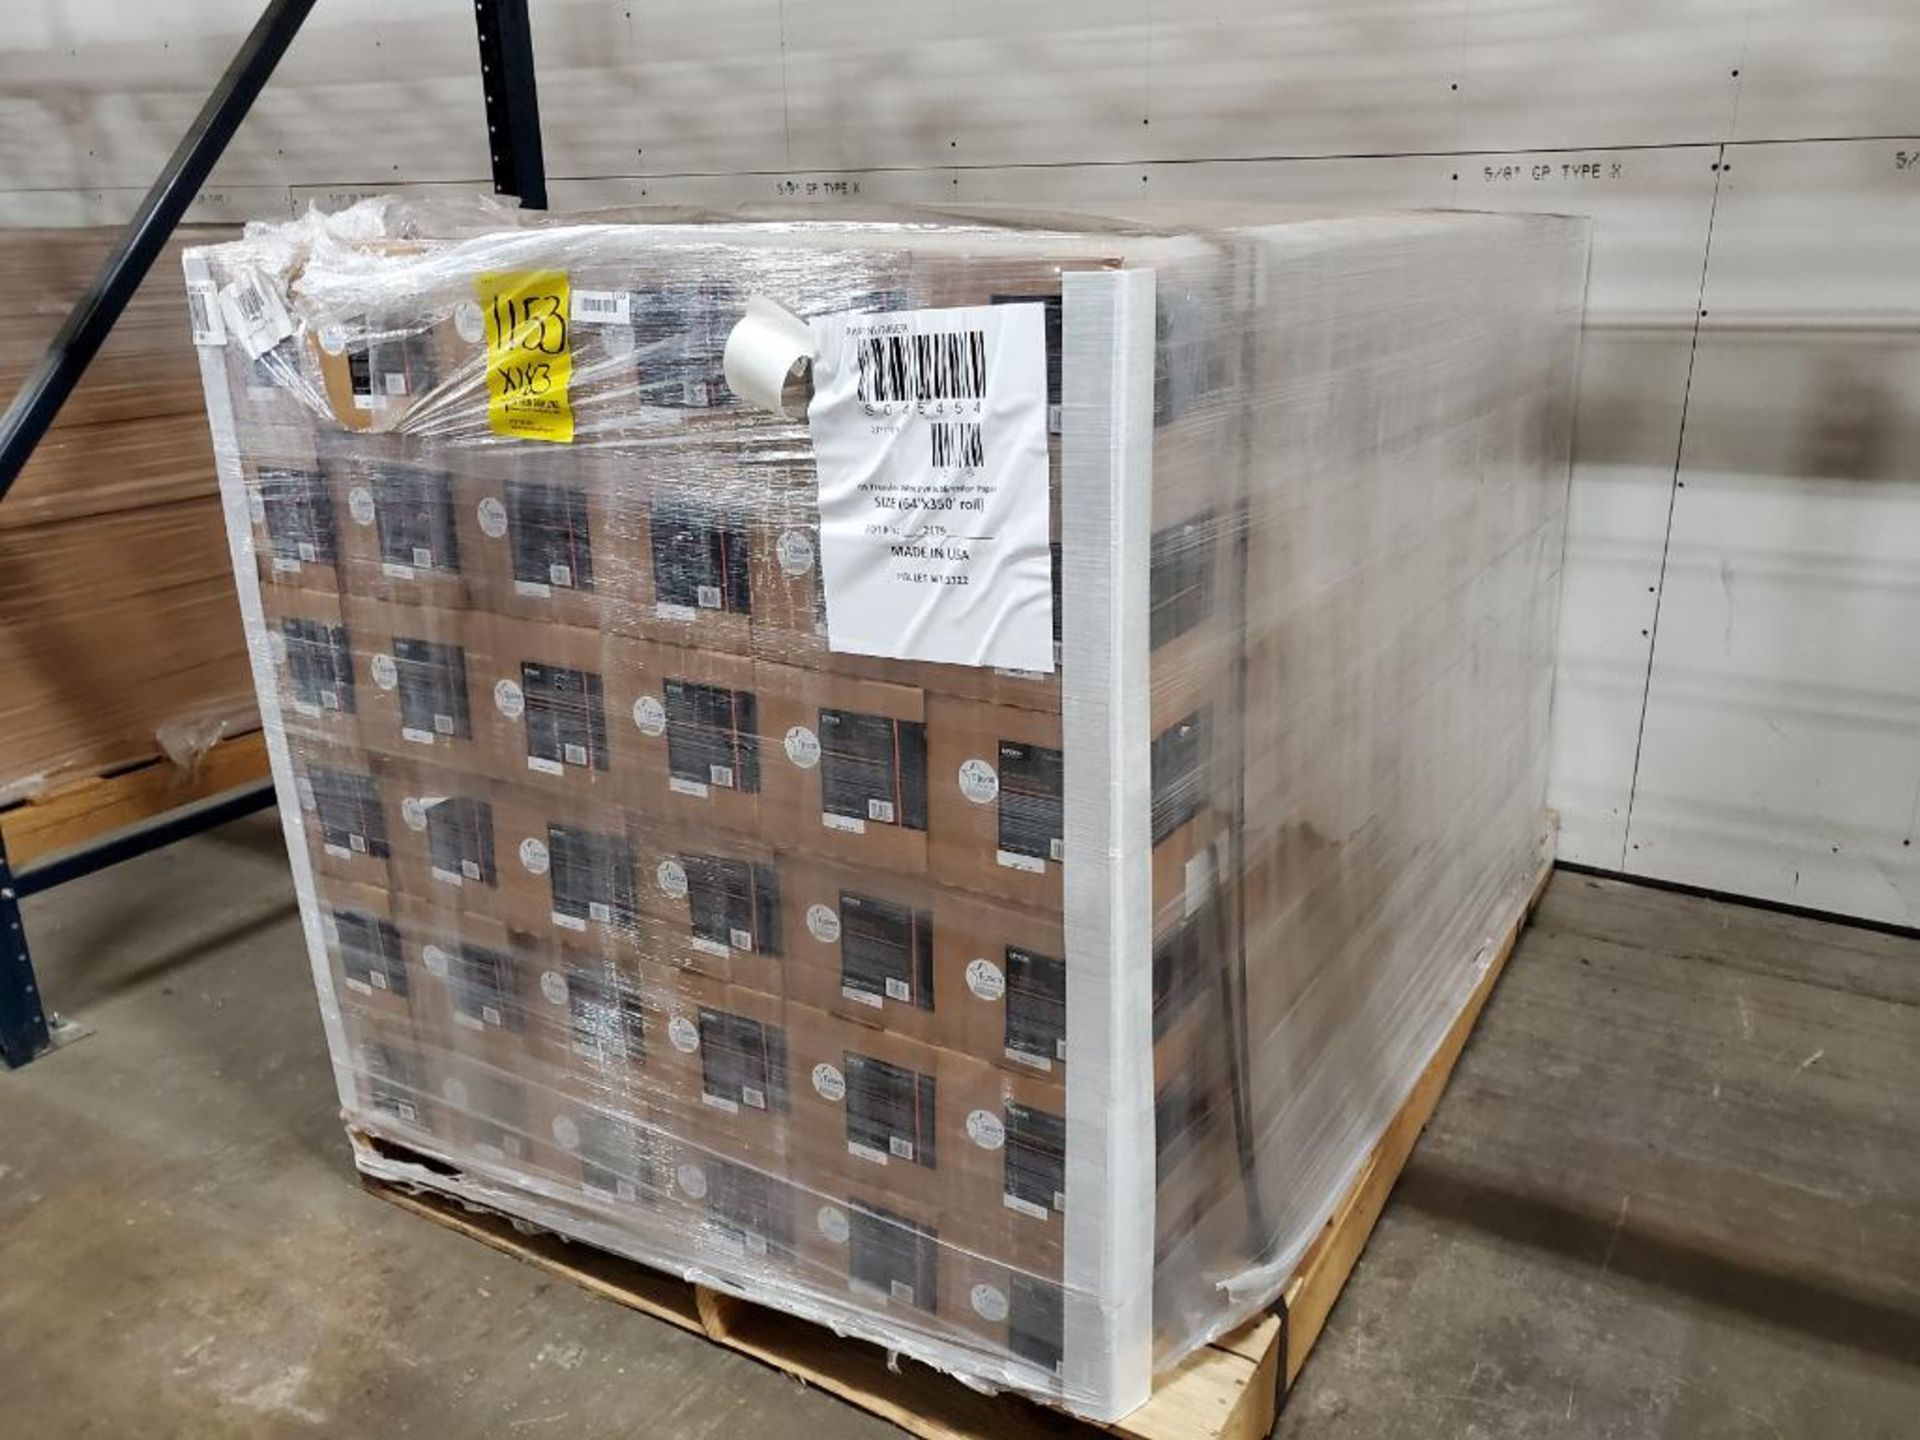 (36) BOXES OF EPSON DS TRANSFER ADHESIVE TEXTILE, 64 IN X 350 FT, (1) ROLL, PRODUCTION SERIES, S0454 - Image 7 of 10